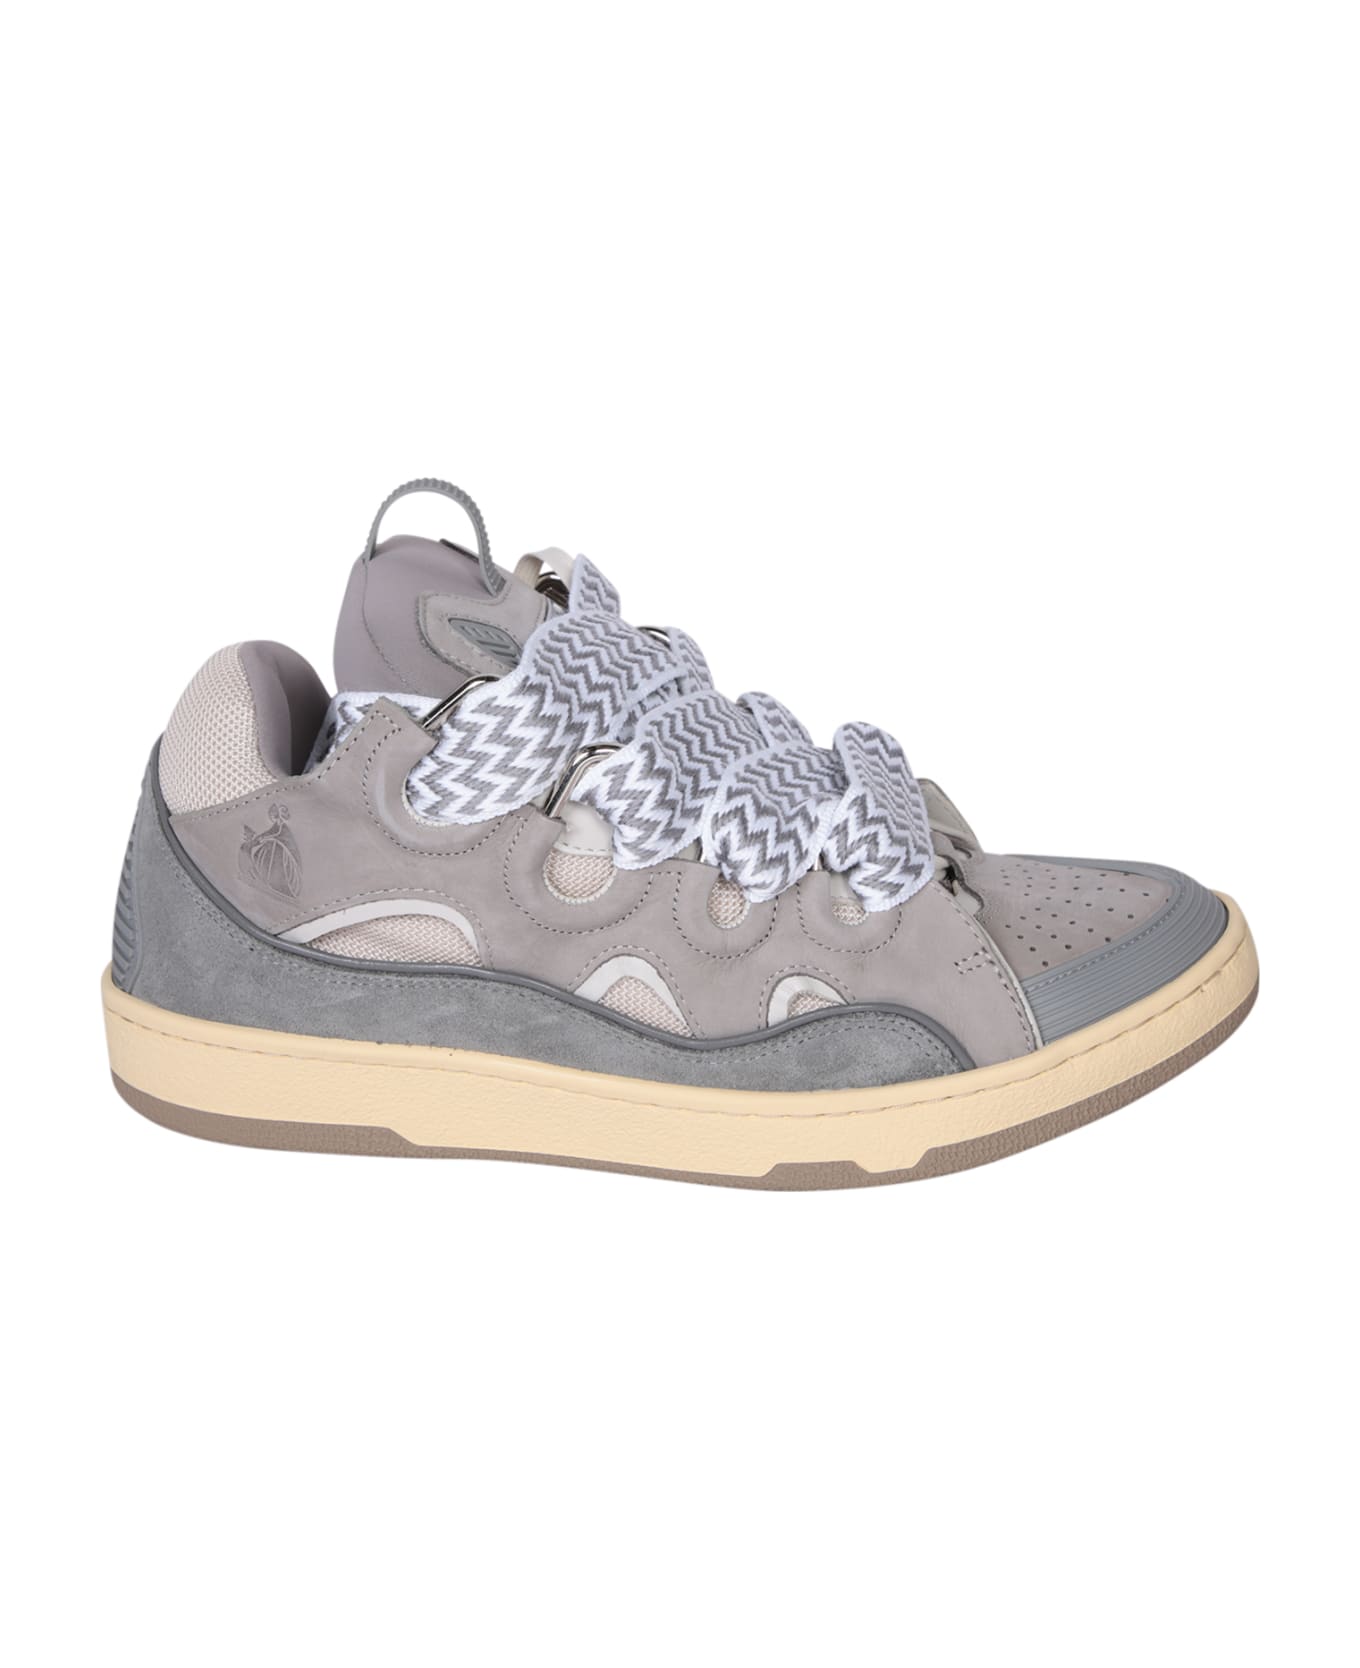 Lanvin Thick Lace Sneakers - Grey 2